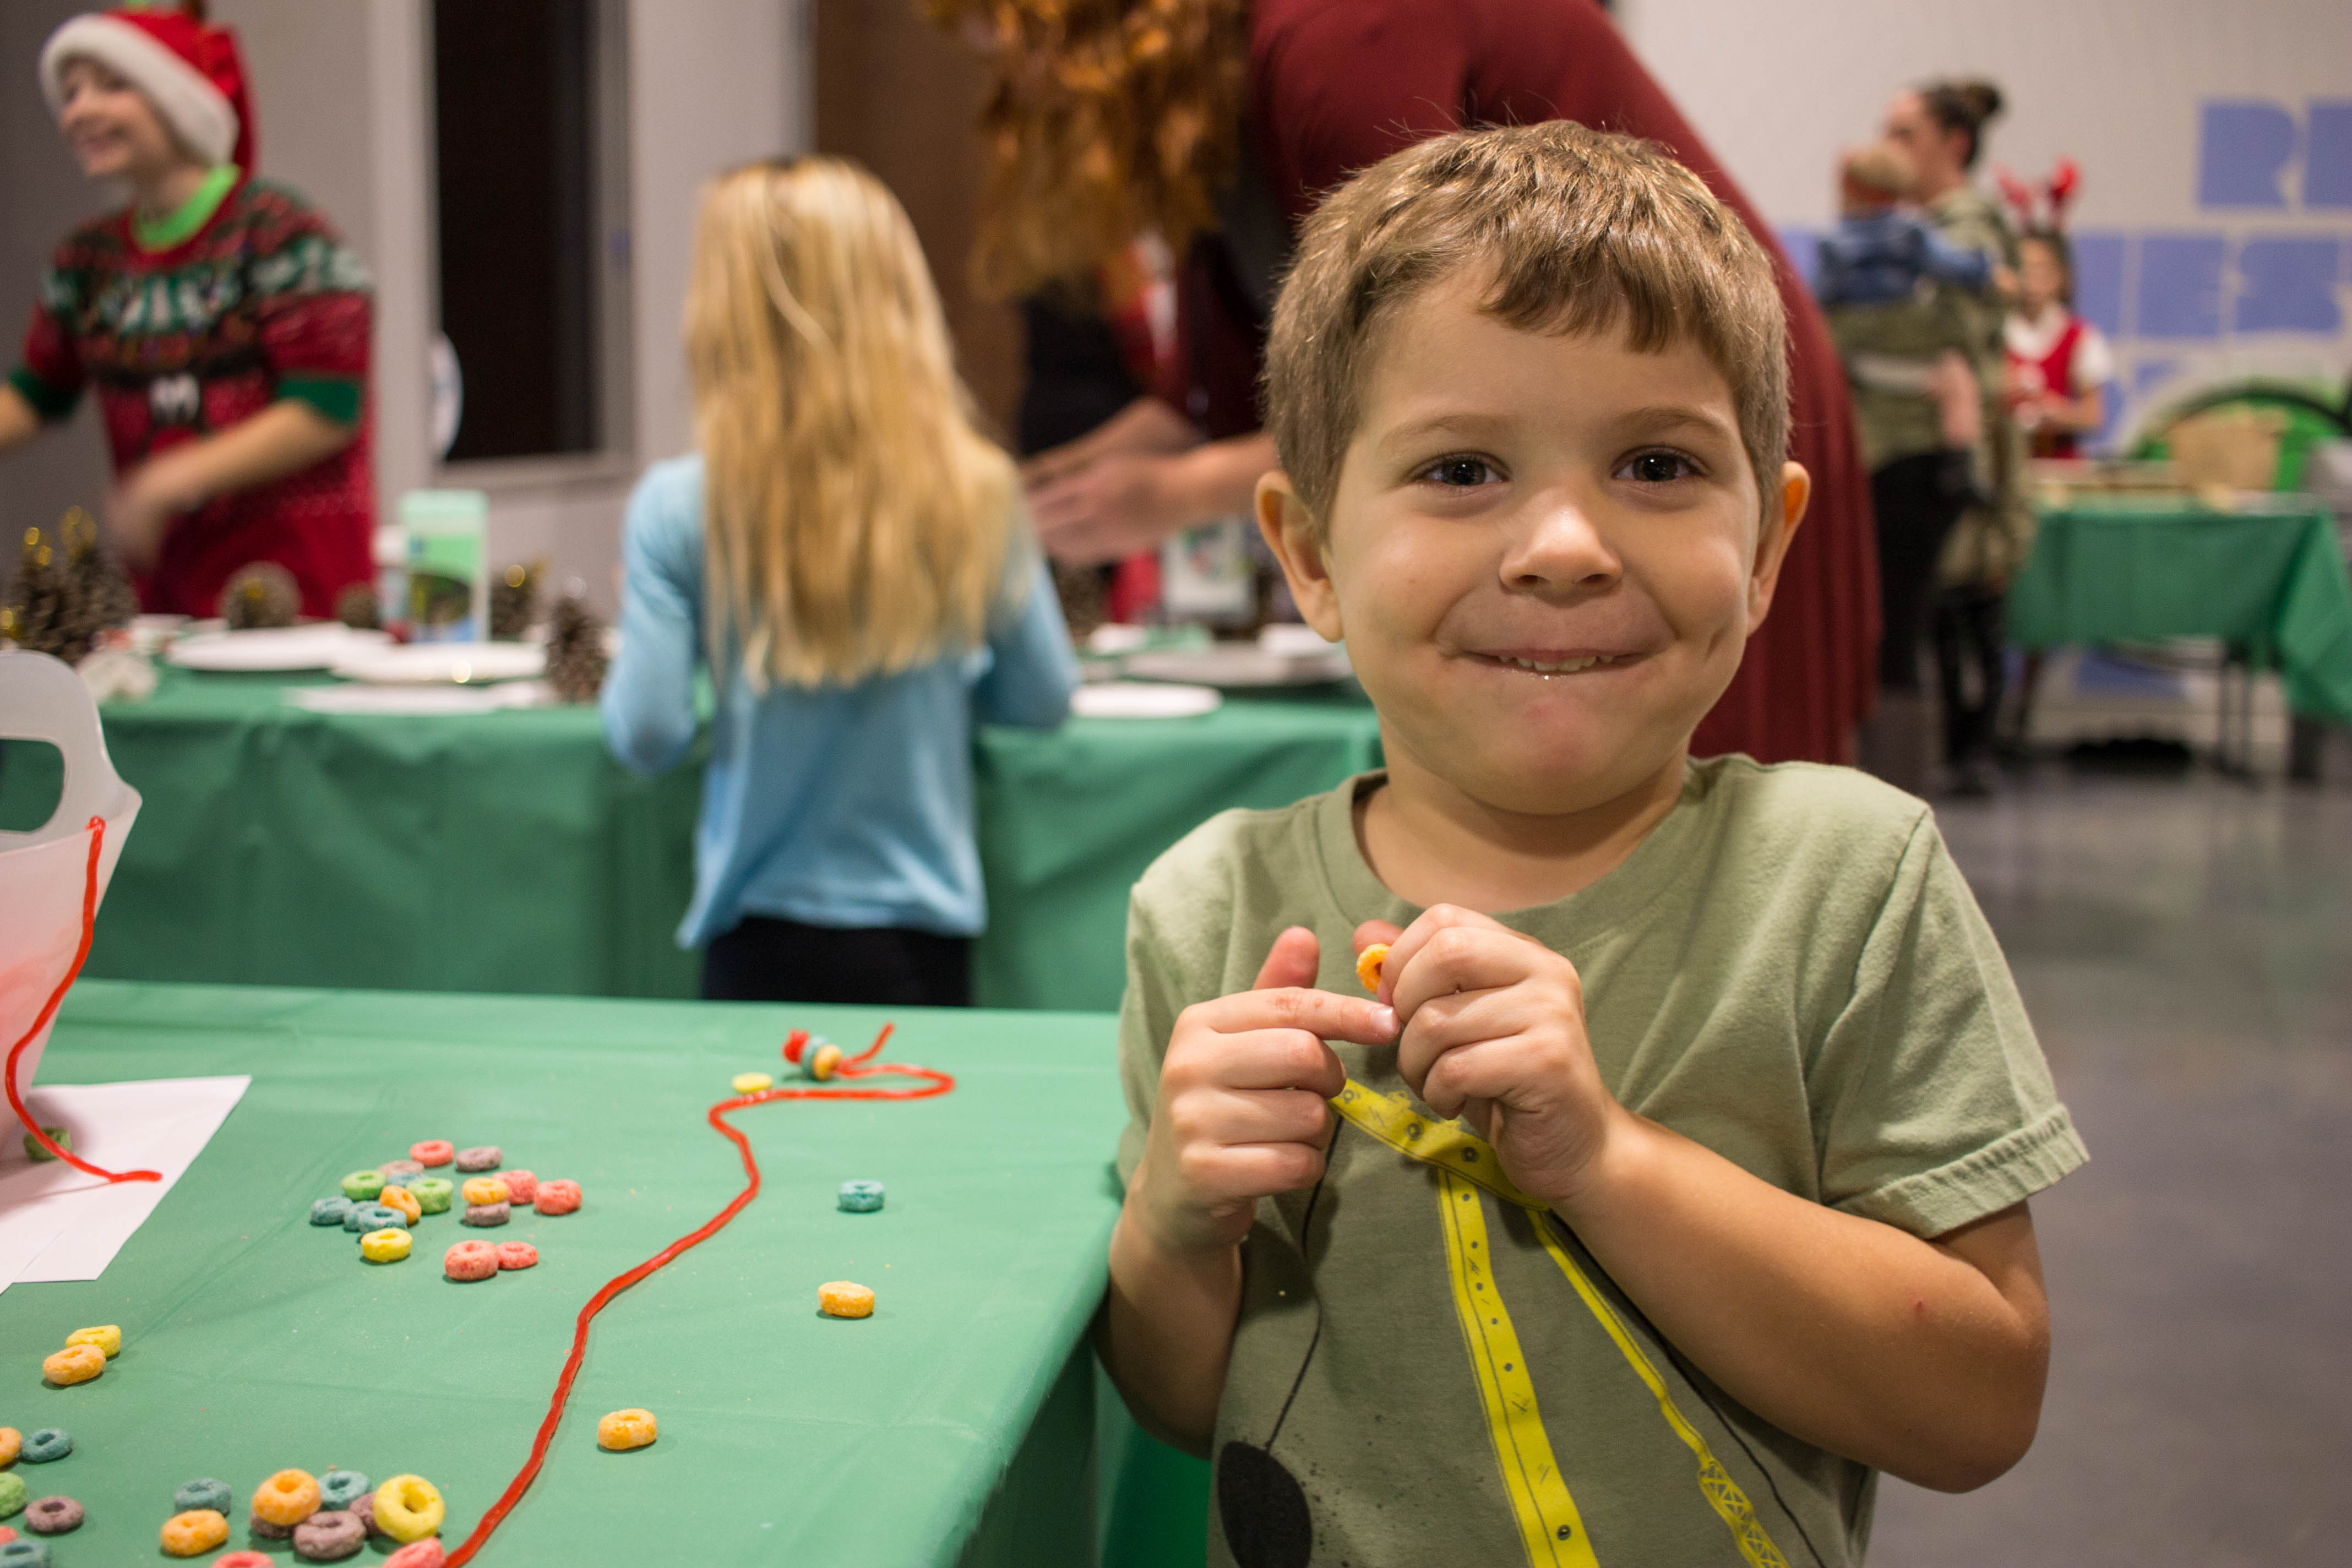 Johnny making a cereal necklace at the craft table during breakfast with Santa